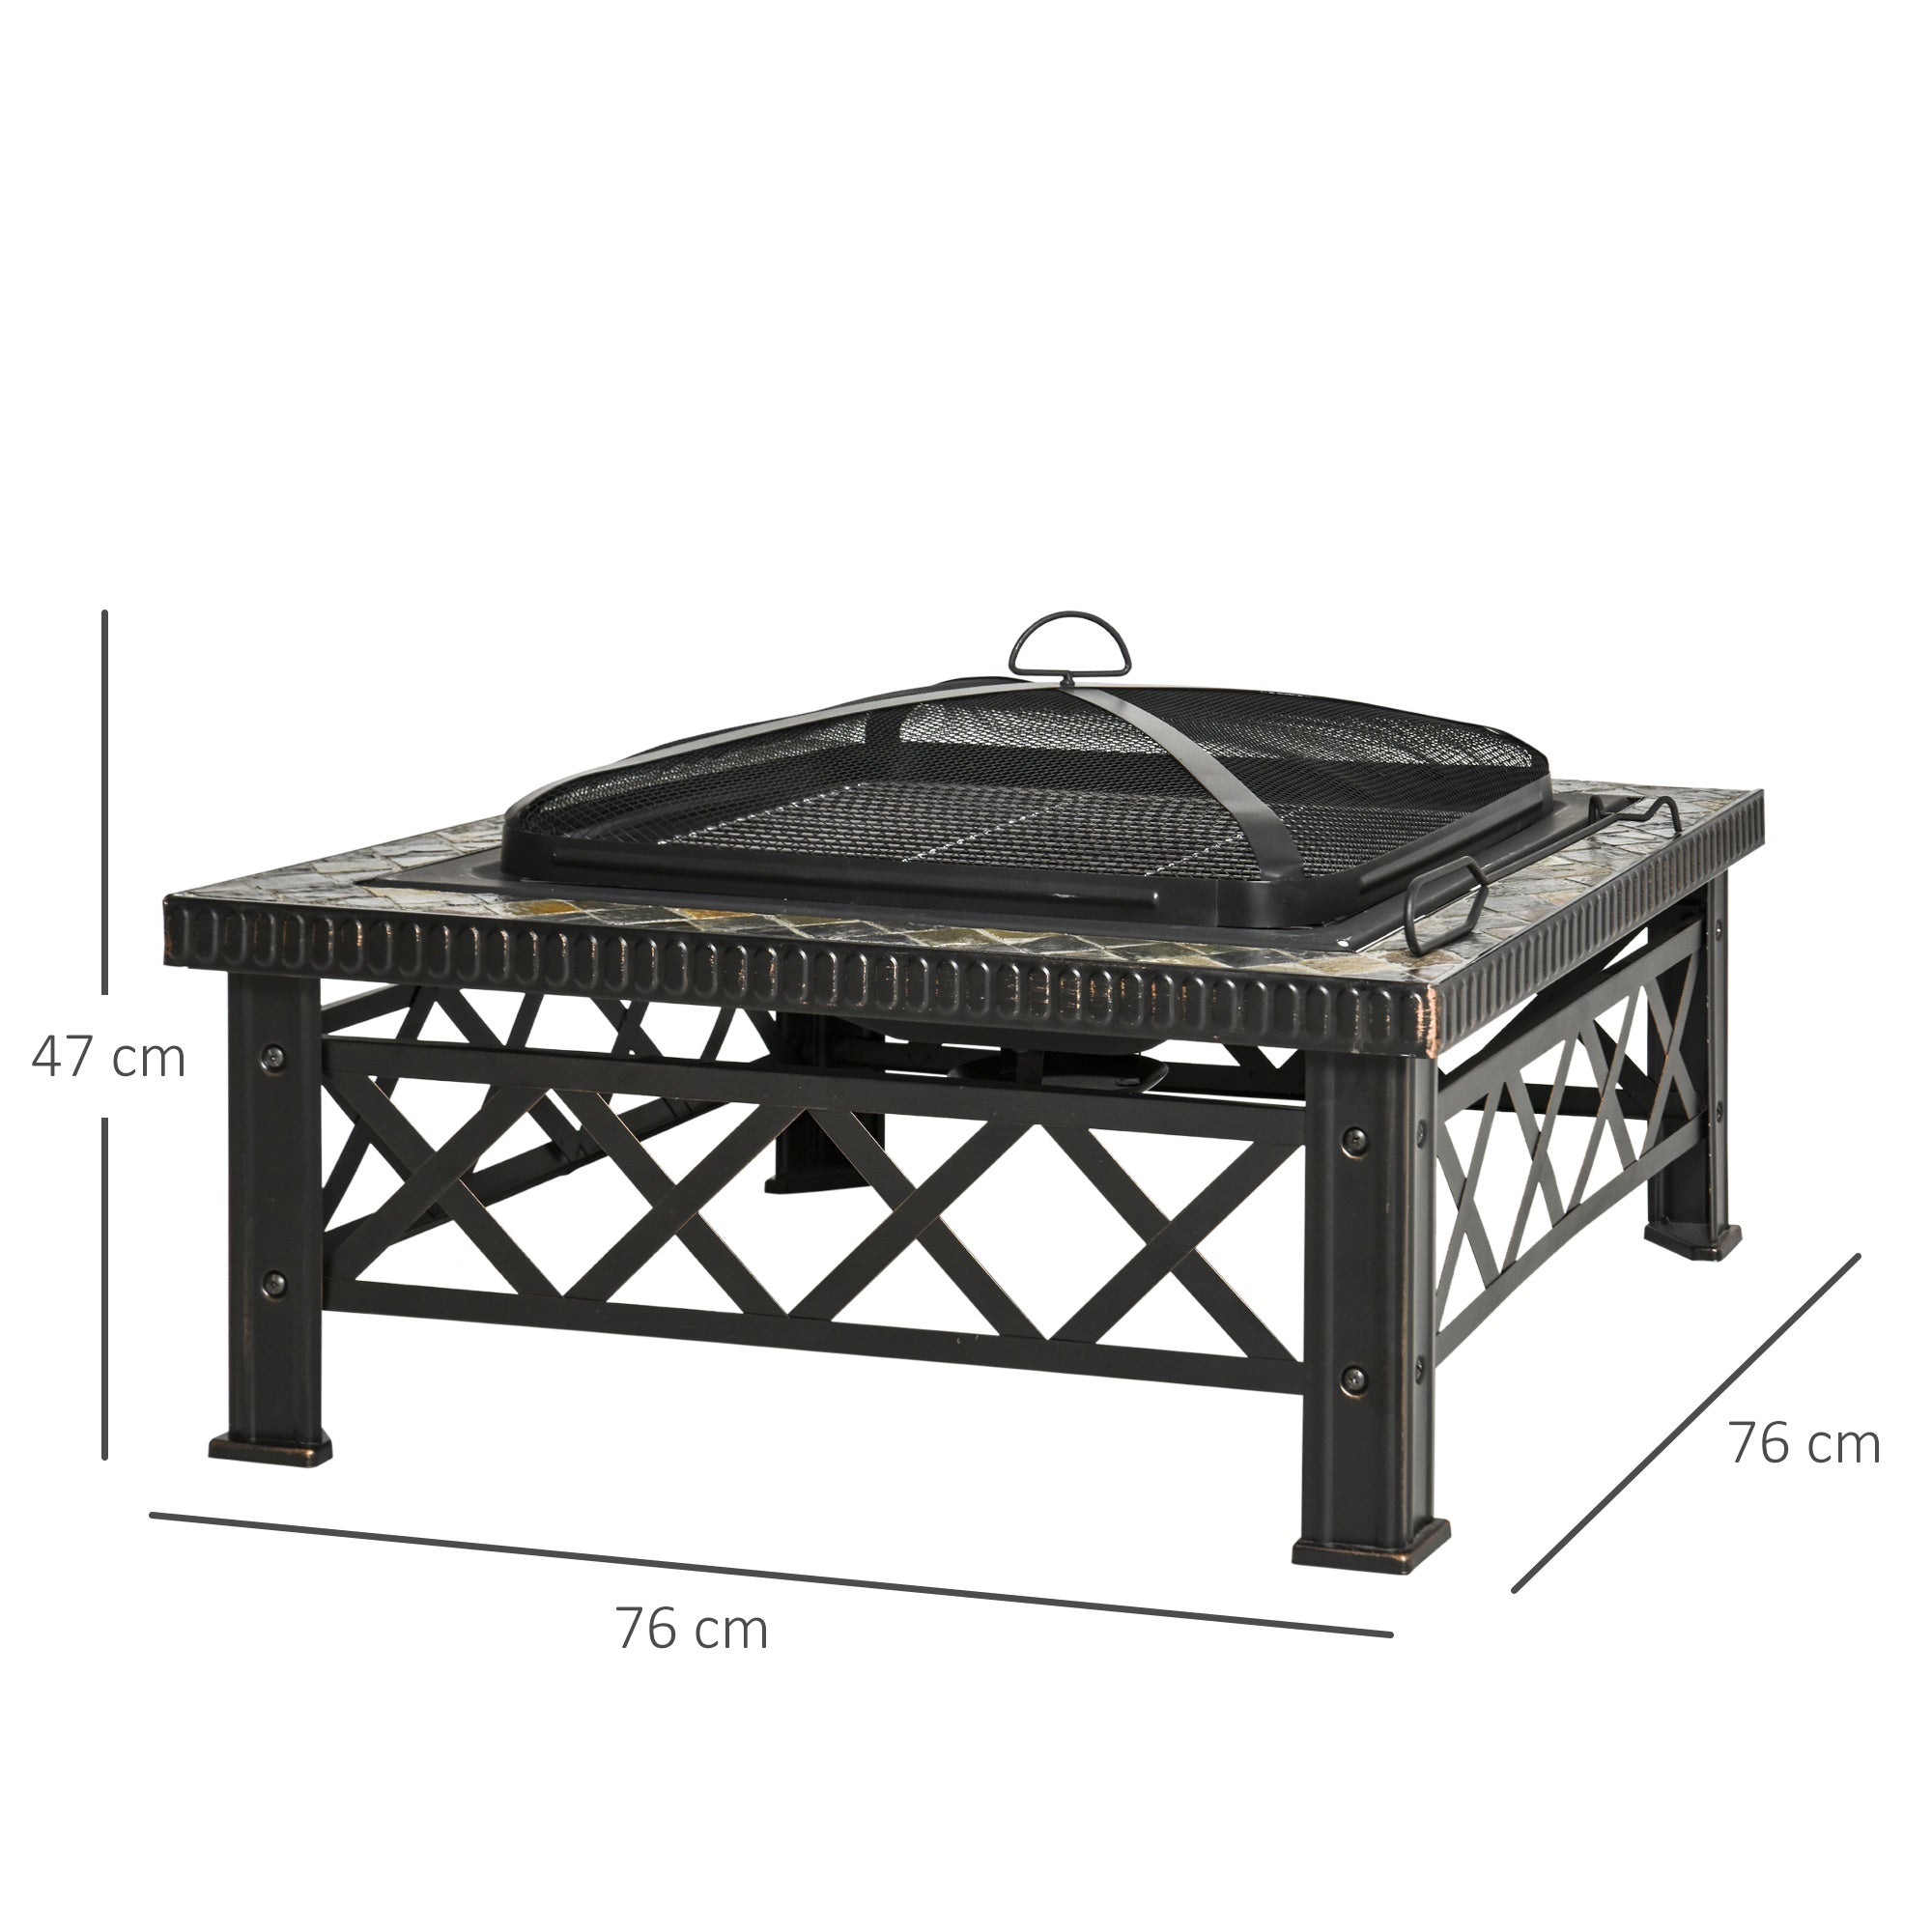 Outsunny 3 in 1 Square Fire Pit Square Table Metal Brazier for Garden, Patio with BBQ Grill Shelf, Spark Screen Cover, Grate, Poker, 76 x 76 x 47cm - Inspirely